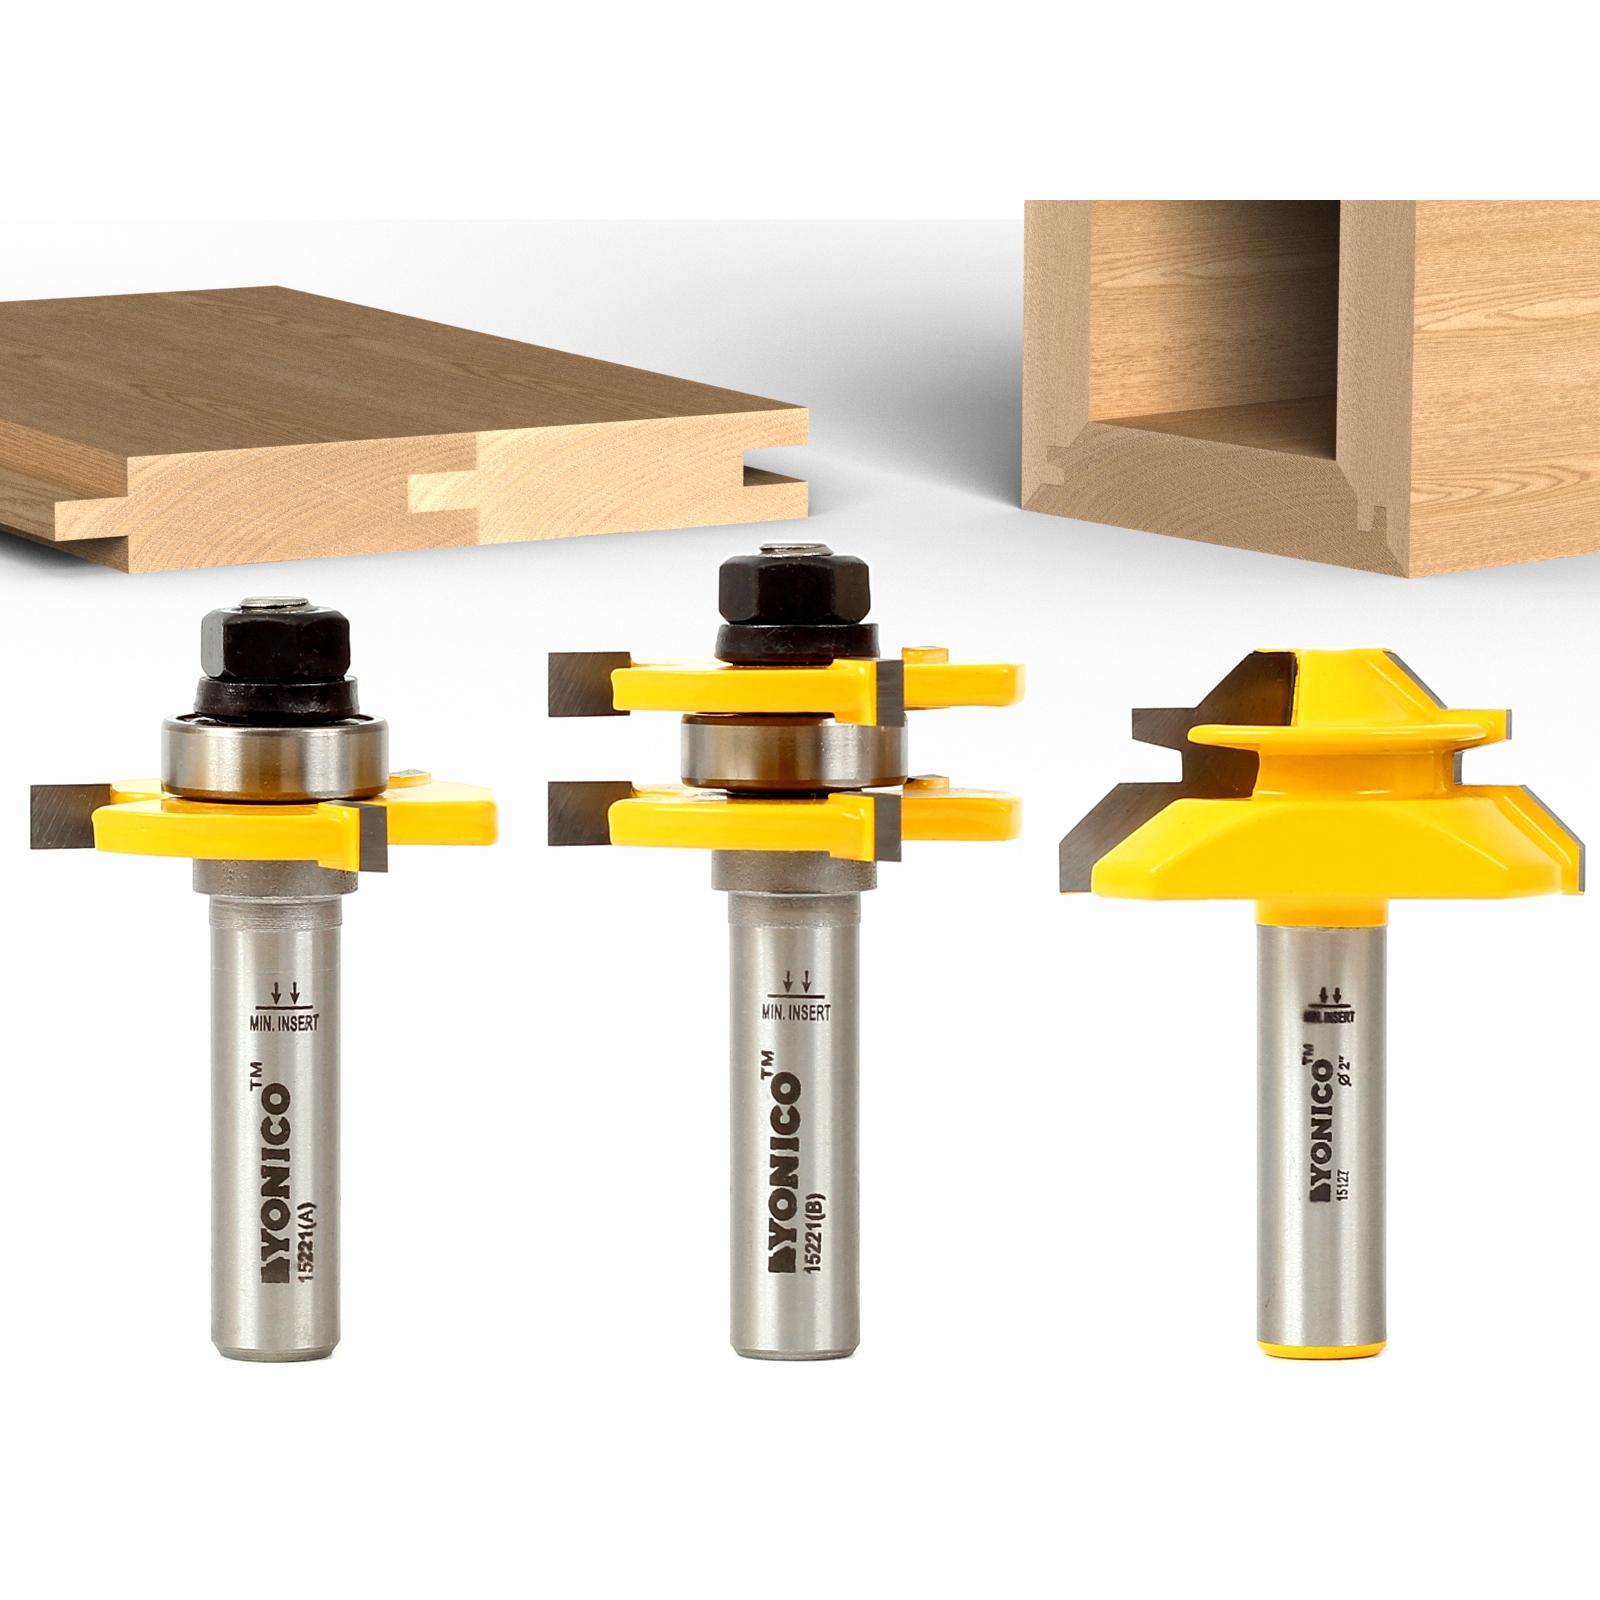 Yonico 15221 Matched Tongue and Groove Router Bit Set 1/2-Inch Shank 